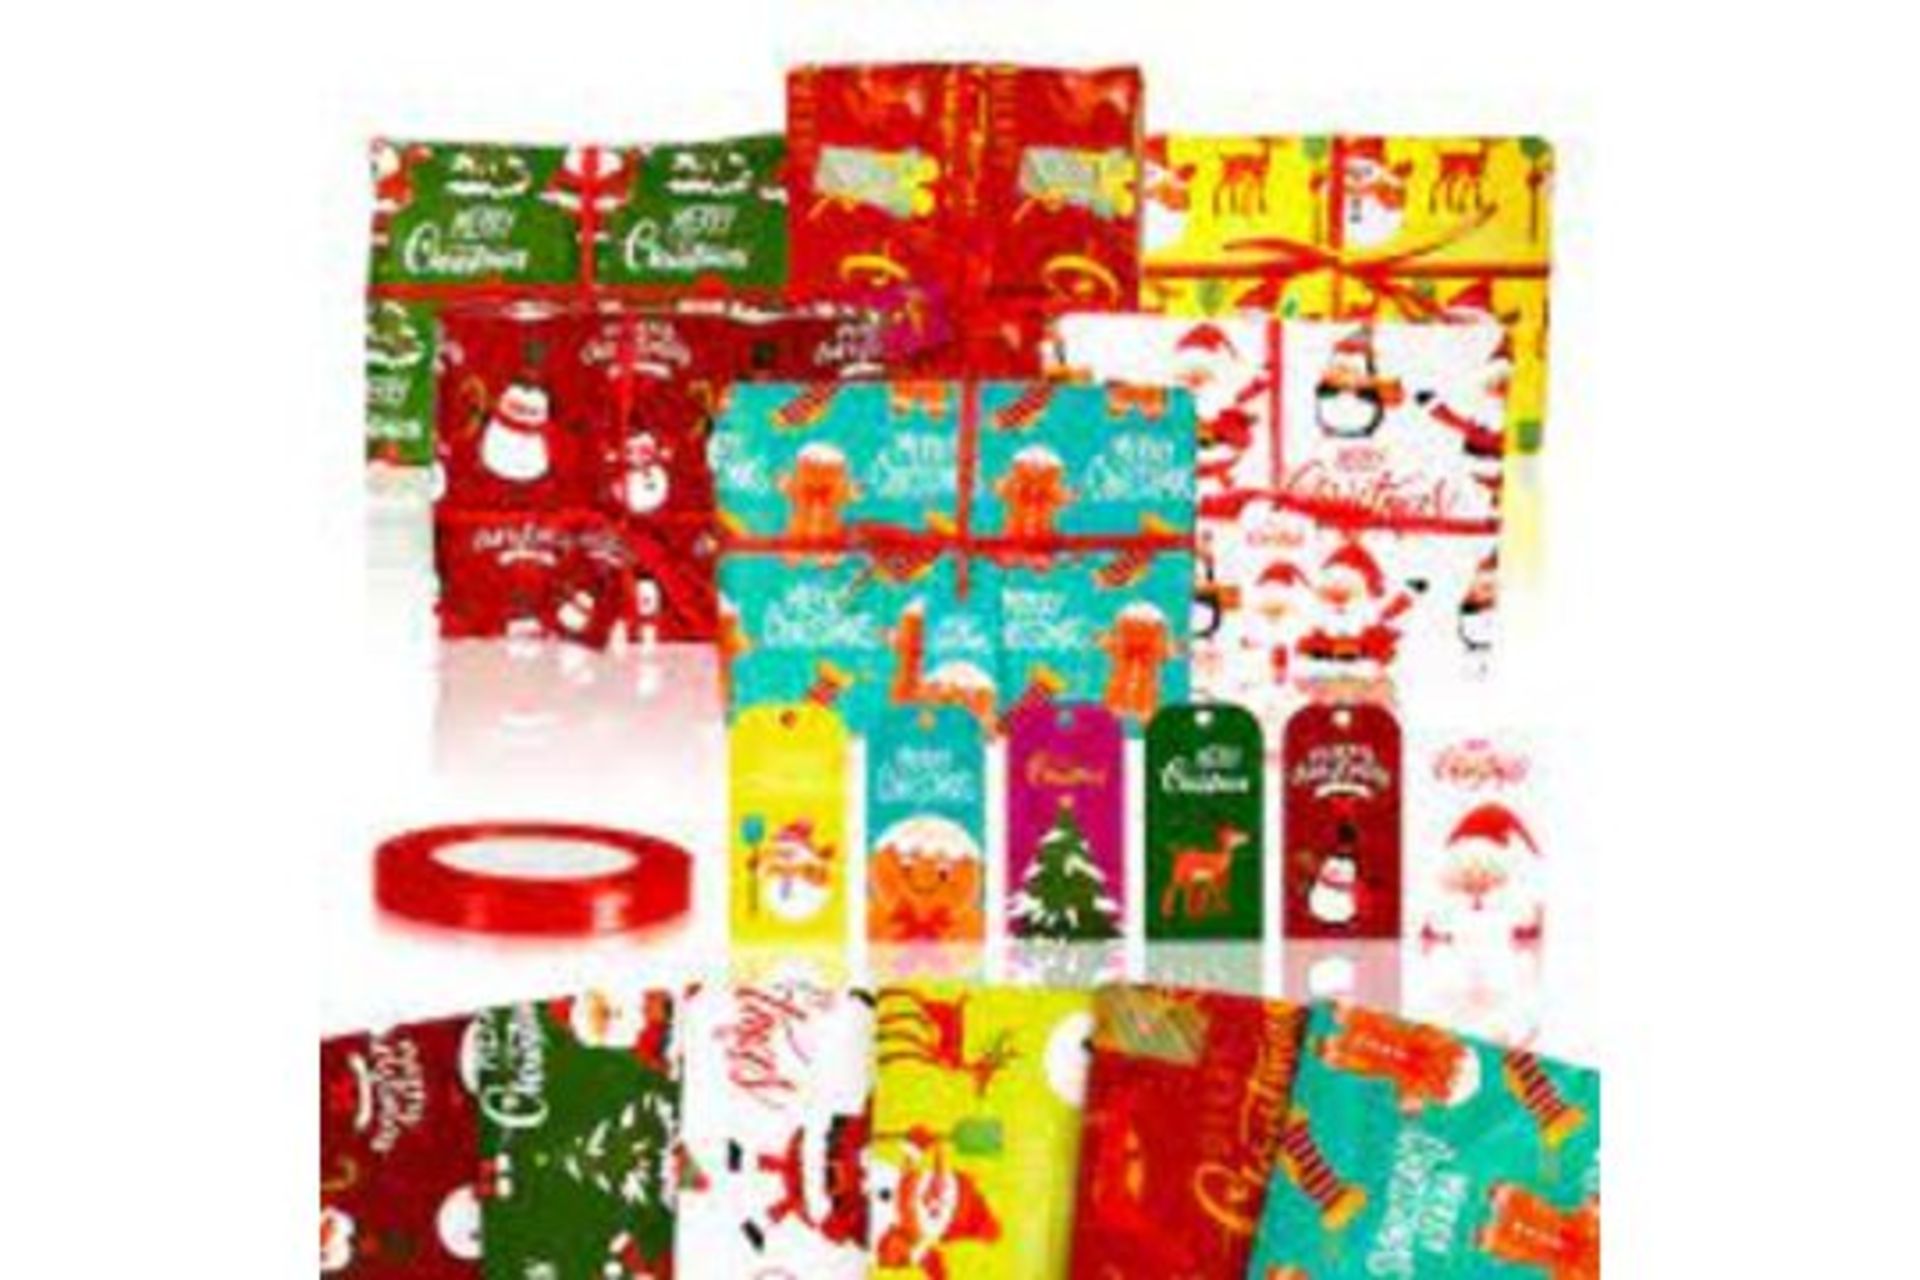 TRADE LOT 600 X BRAND NEW ASSORTED SETS OF 6 FOLDED SHEETS LUXURY CHRISTMAS WRAPPING PAPER SETS IN - Image 4 of 4